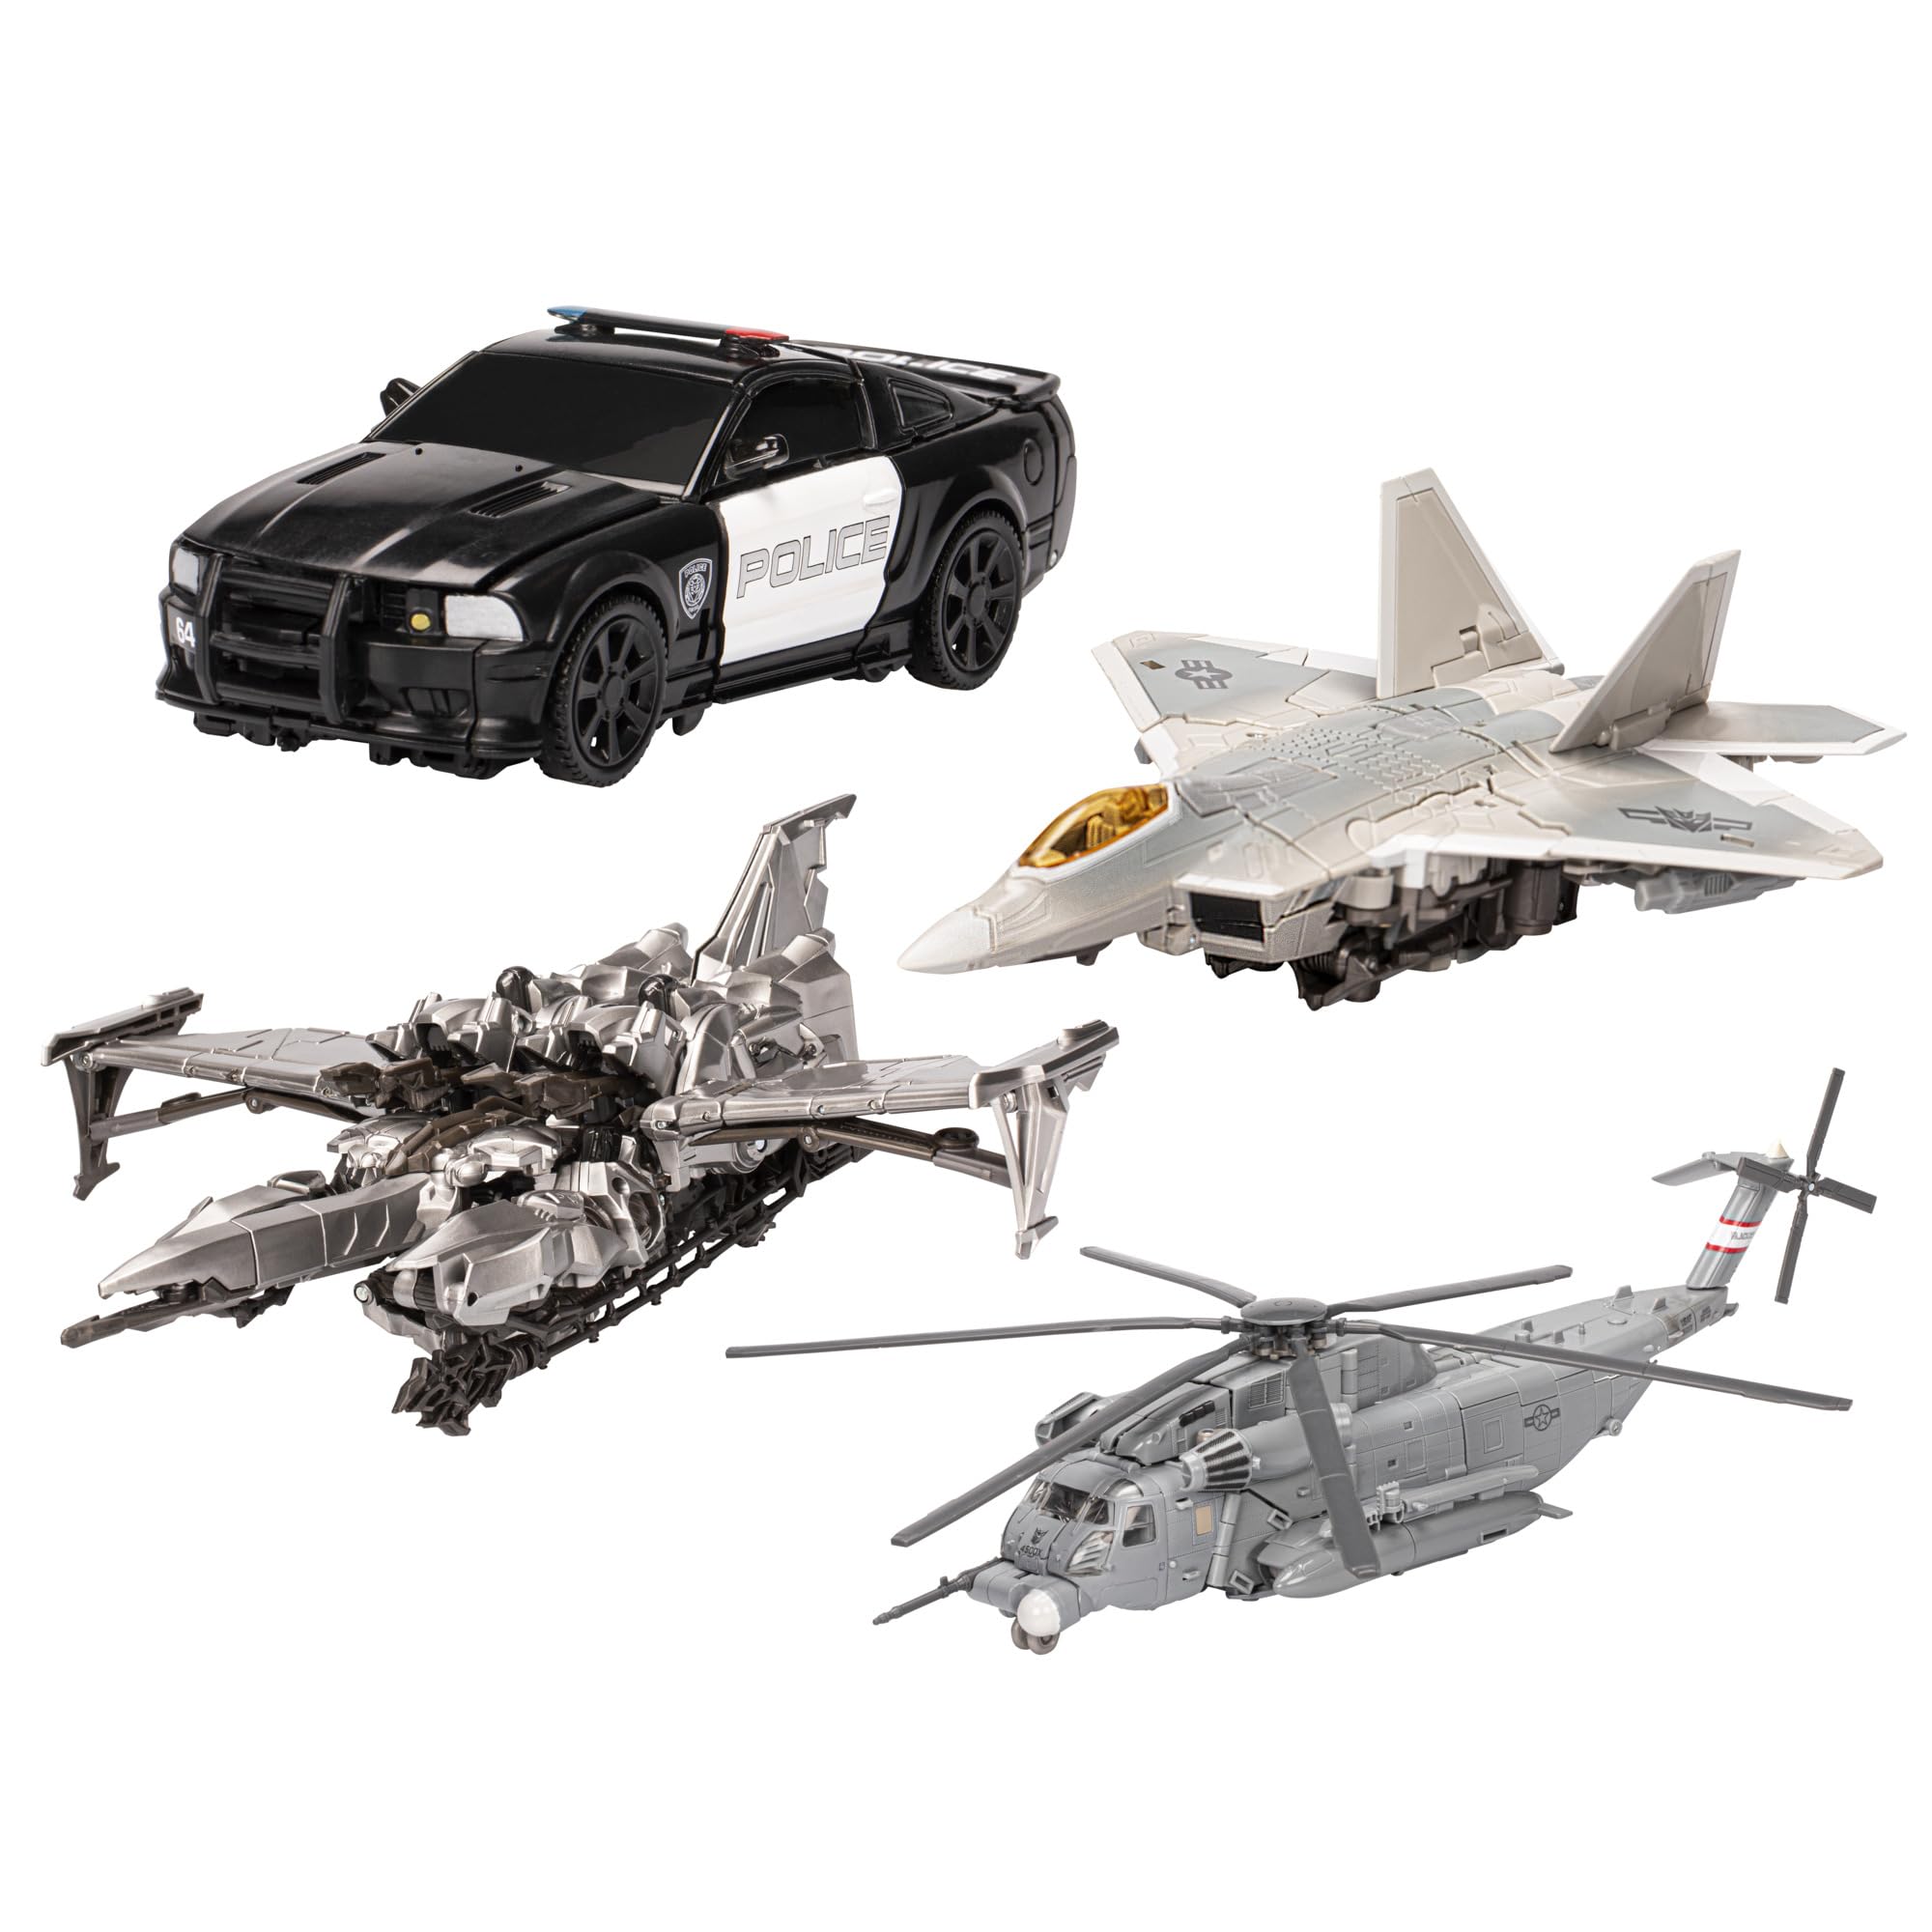 Transformers Toys Studio Series Movie 1 15th Anniversary Decepticon Multipack, with 4 Action Figures for Boys and Girls Ages 8 and Up (Amazon Exclusive)